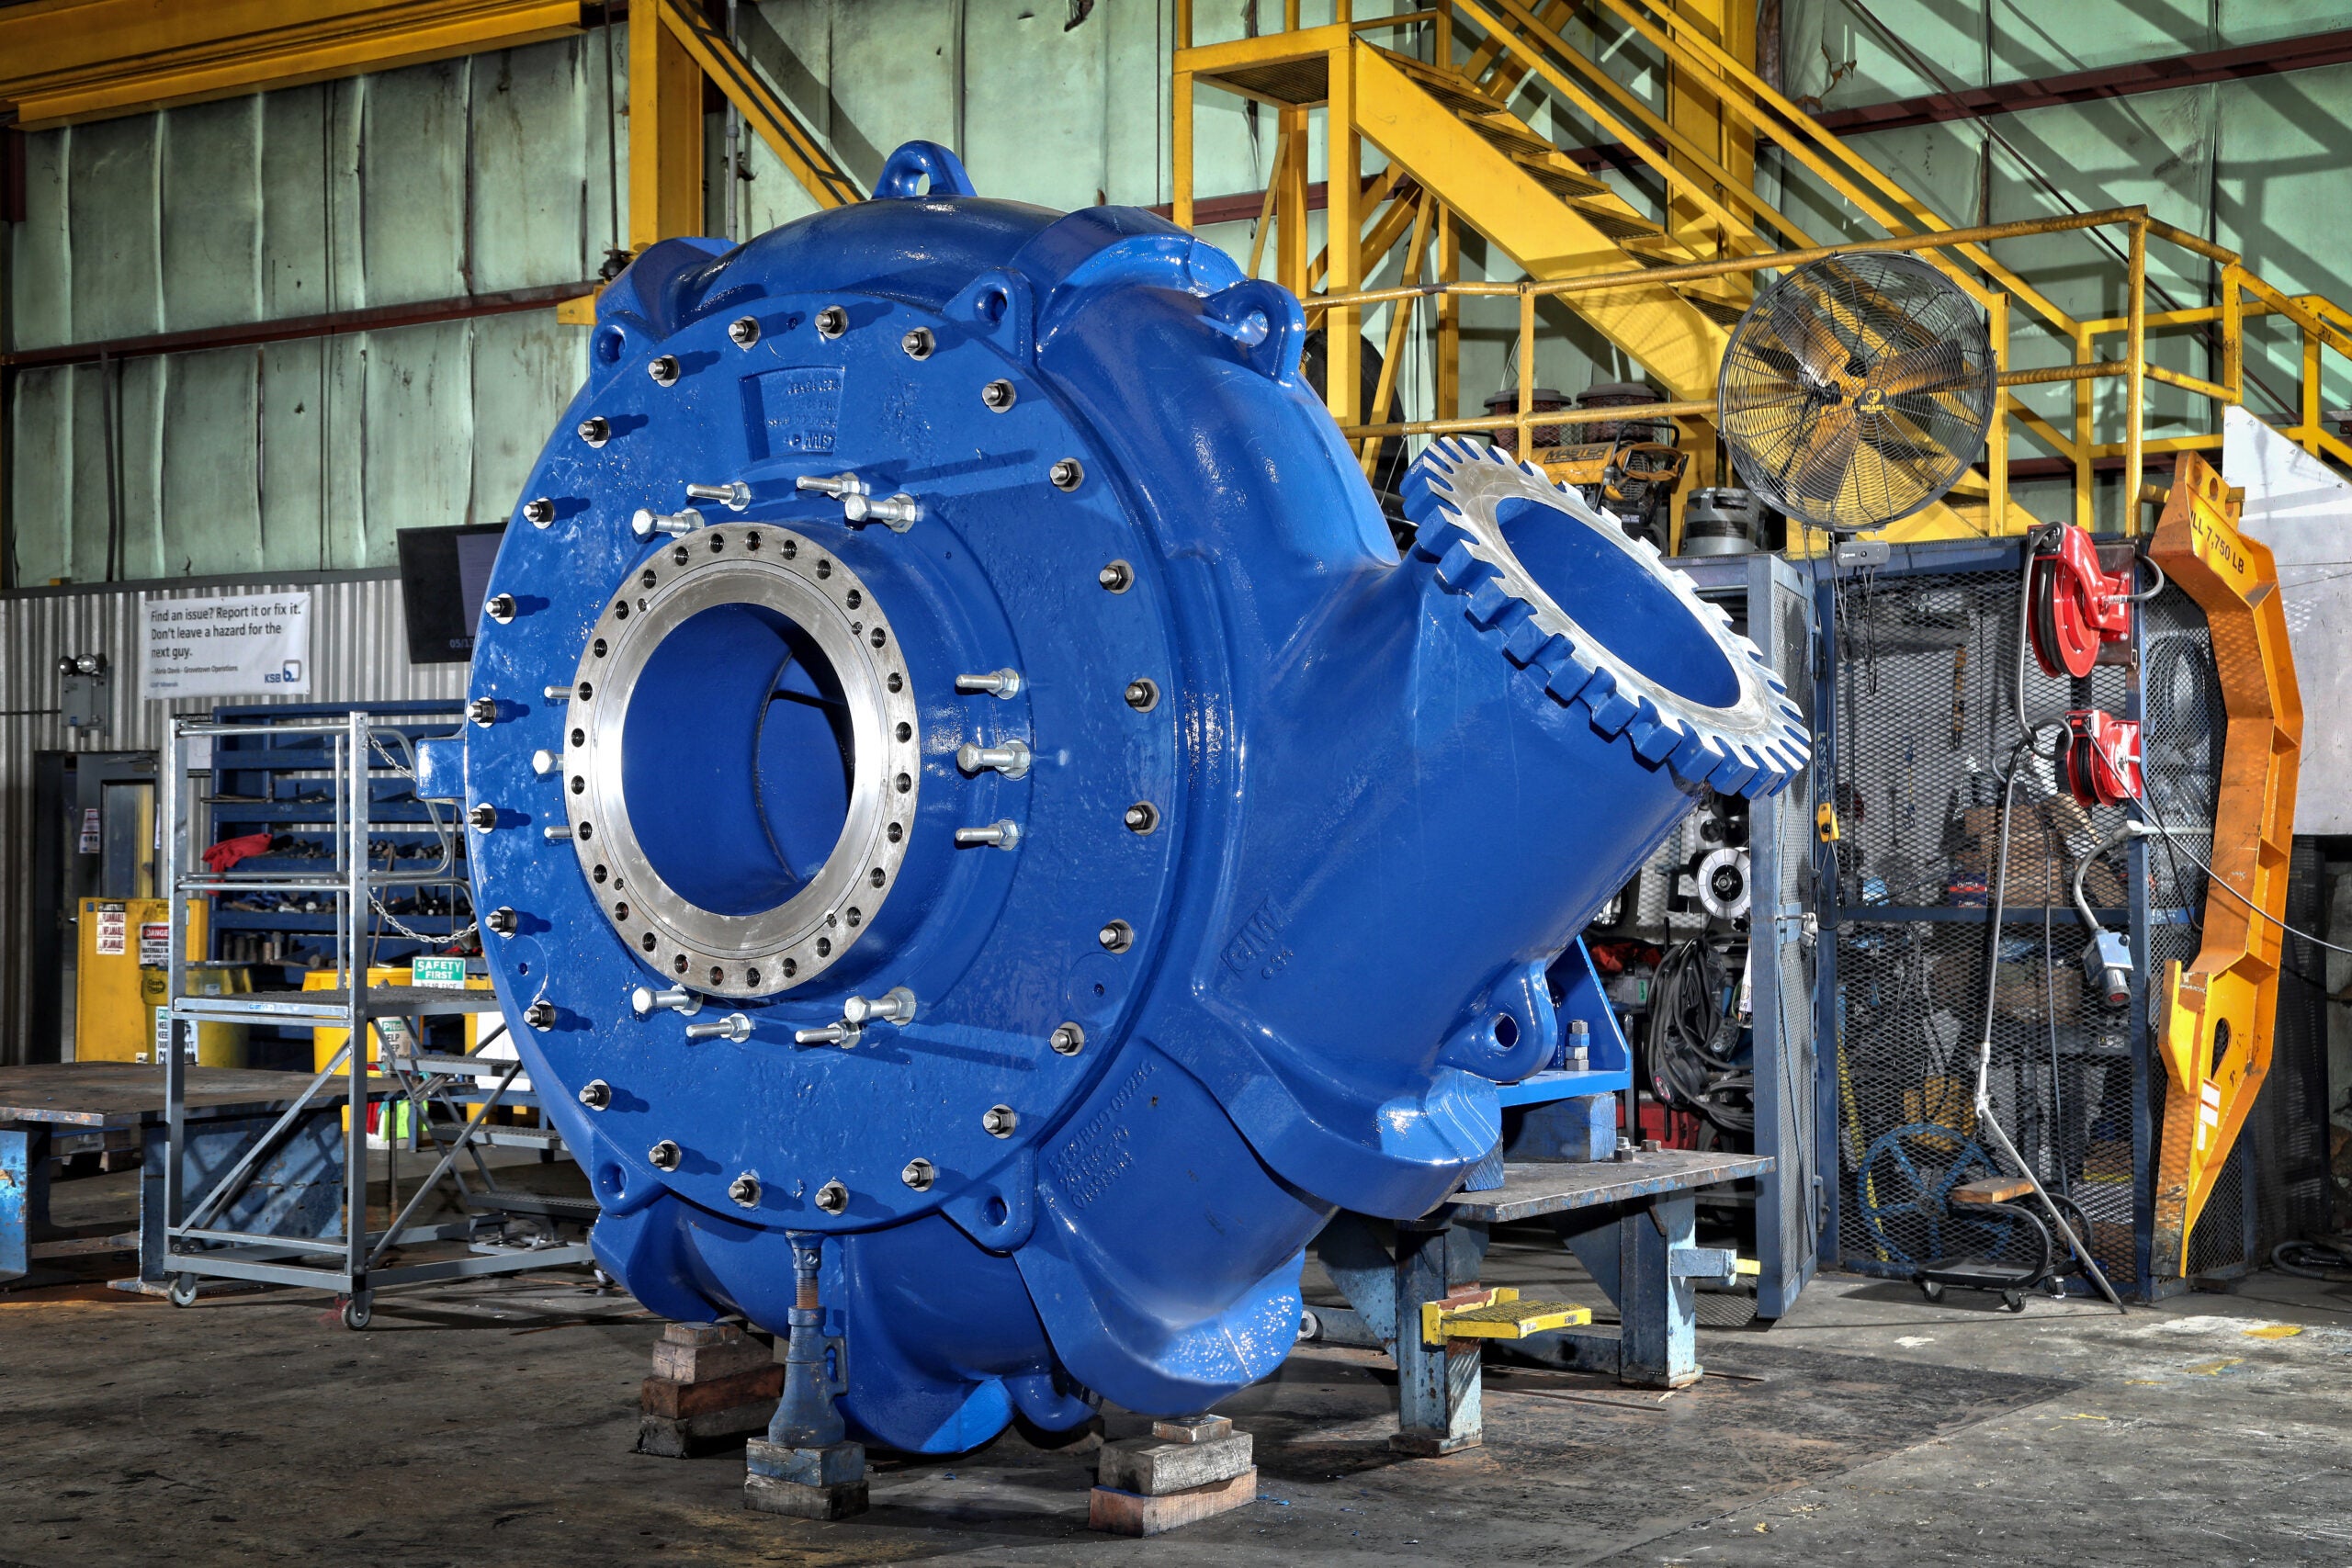 KSB leads the way in hard-wearing and robust slurry pump solutions